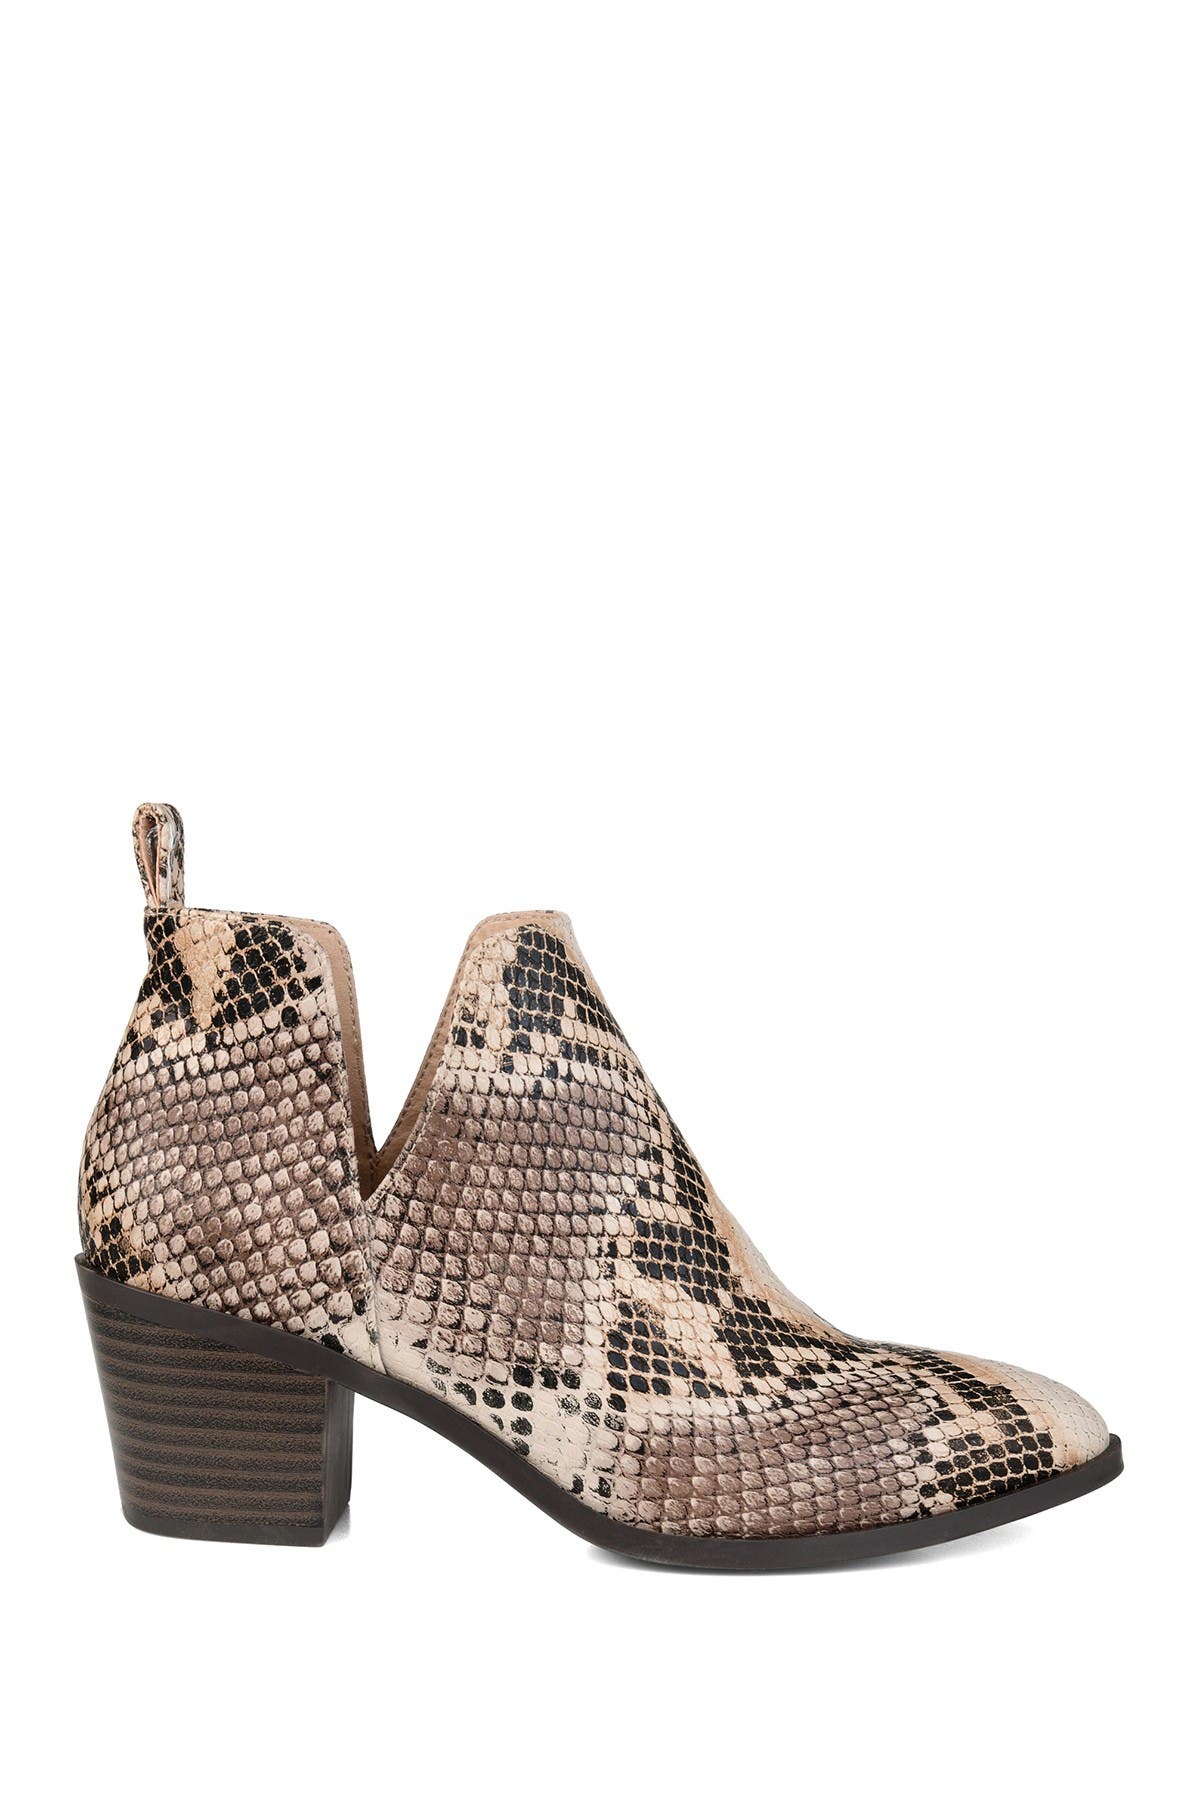 Journee Collection Lola Patterned Ankle Bootie In Open Miscellaneous1